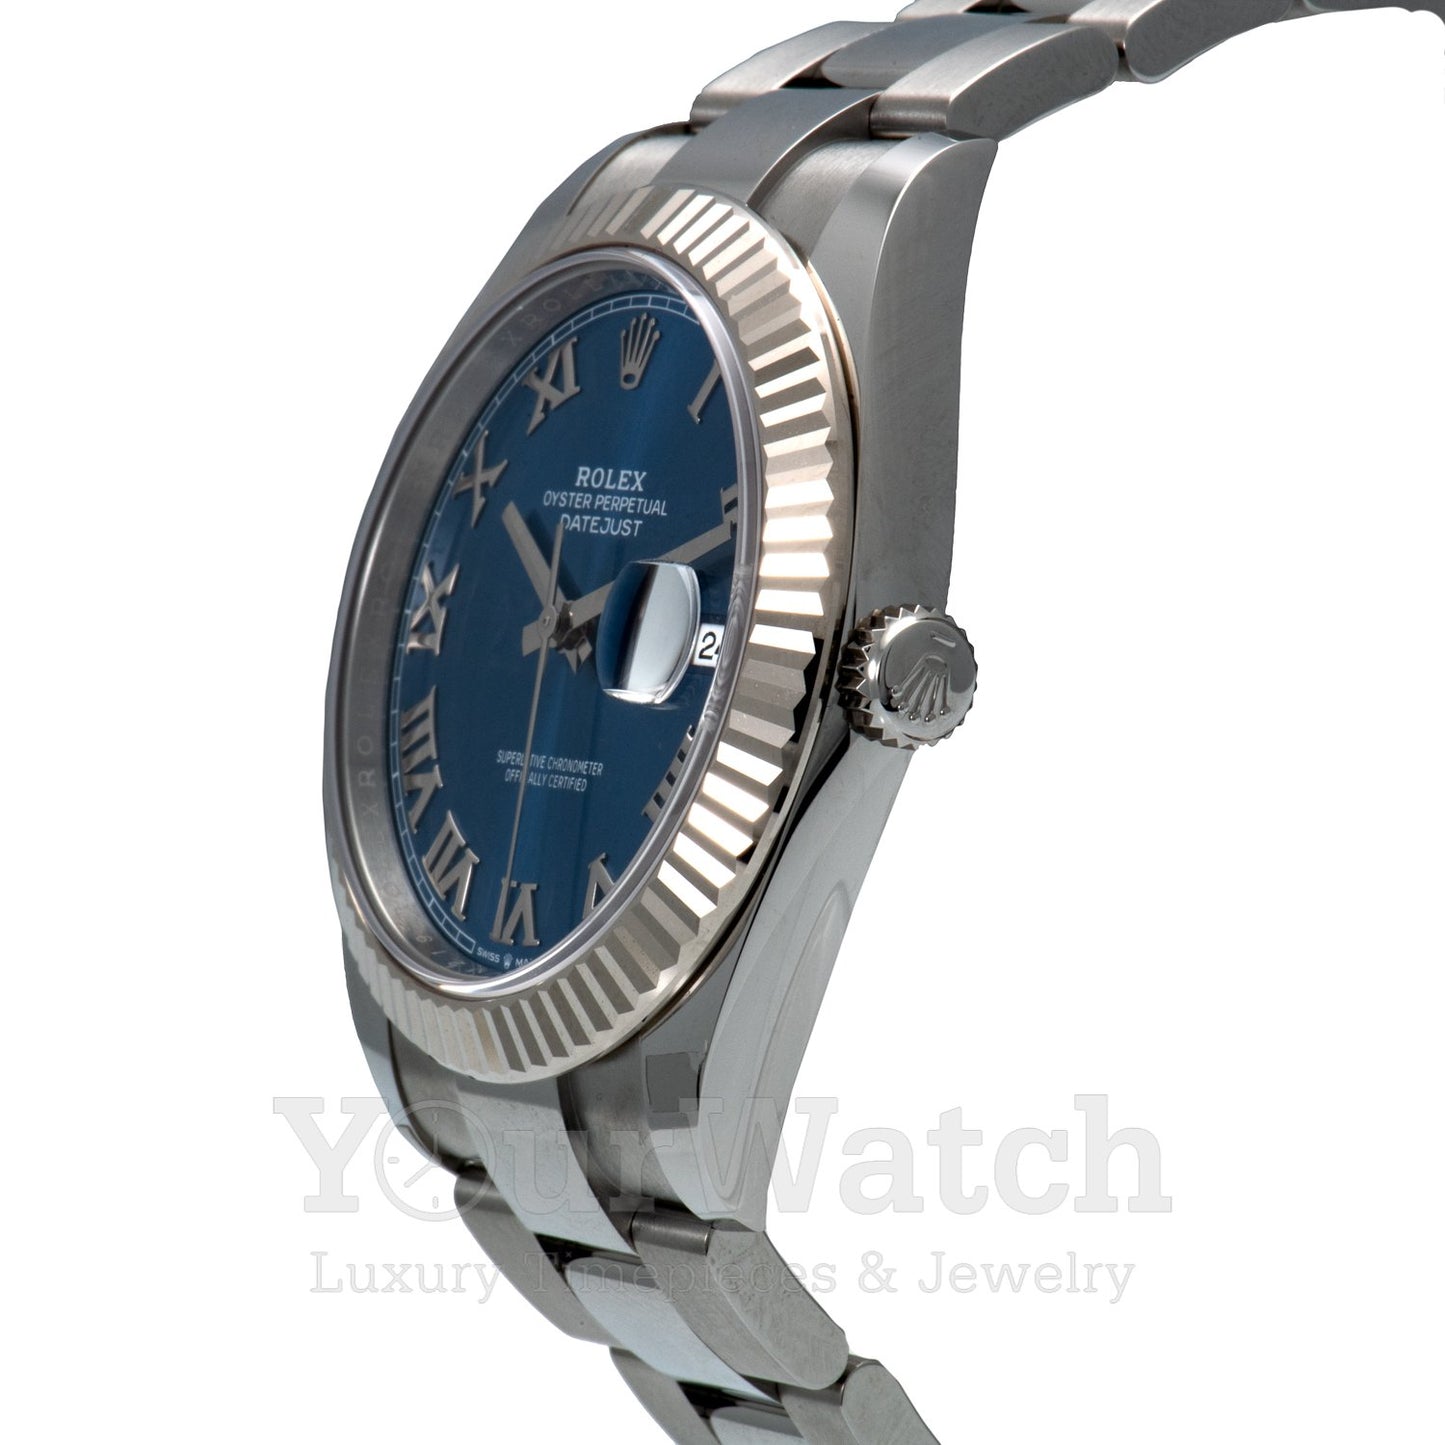 Rolex Datejust Stainless Steel Blue Dial 41mm Mens Watch